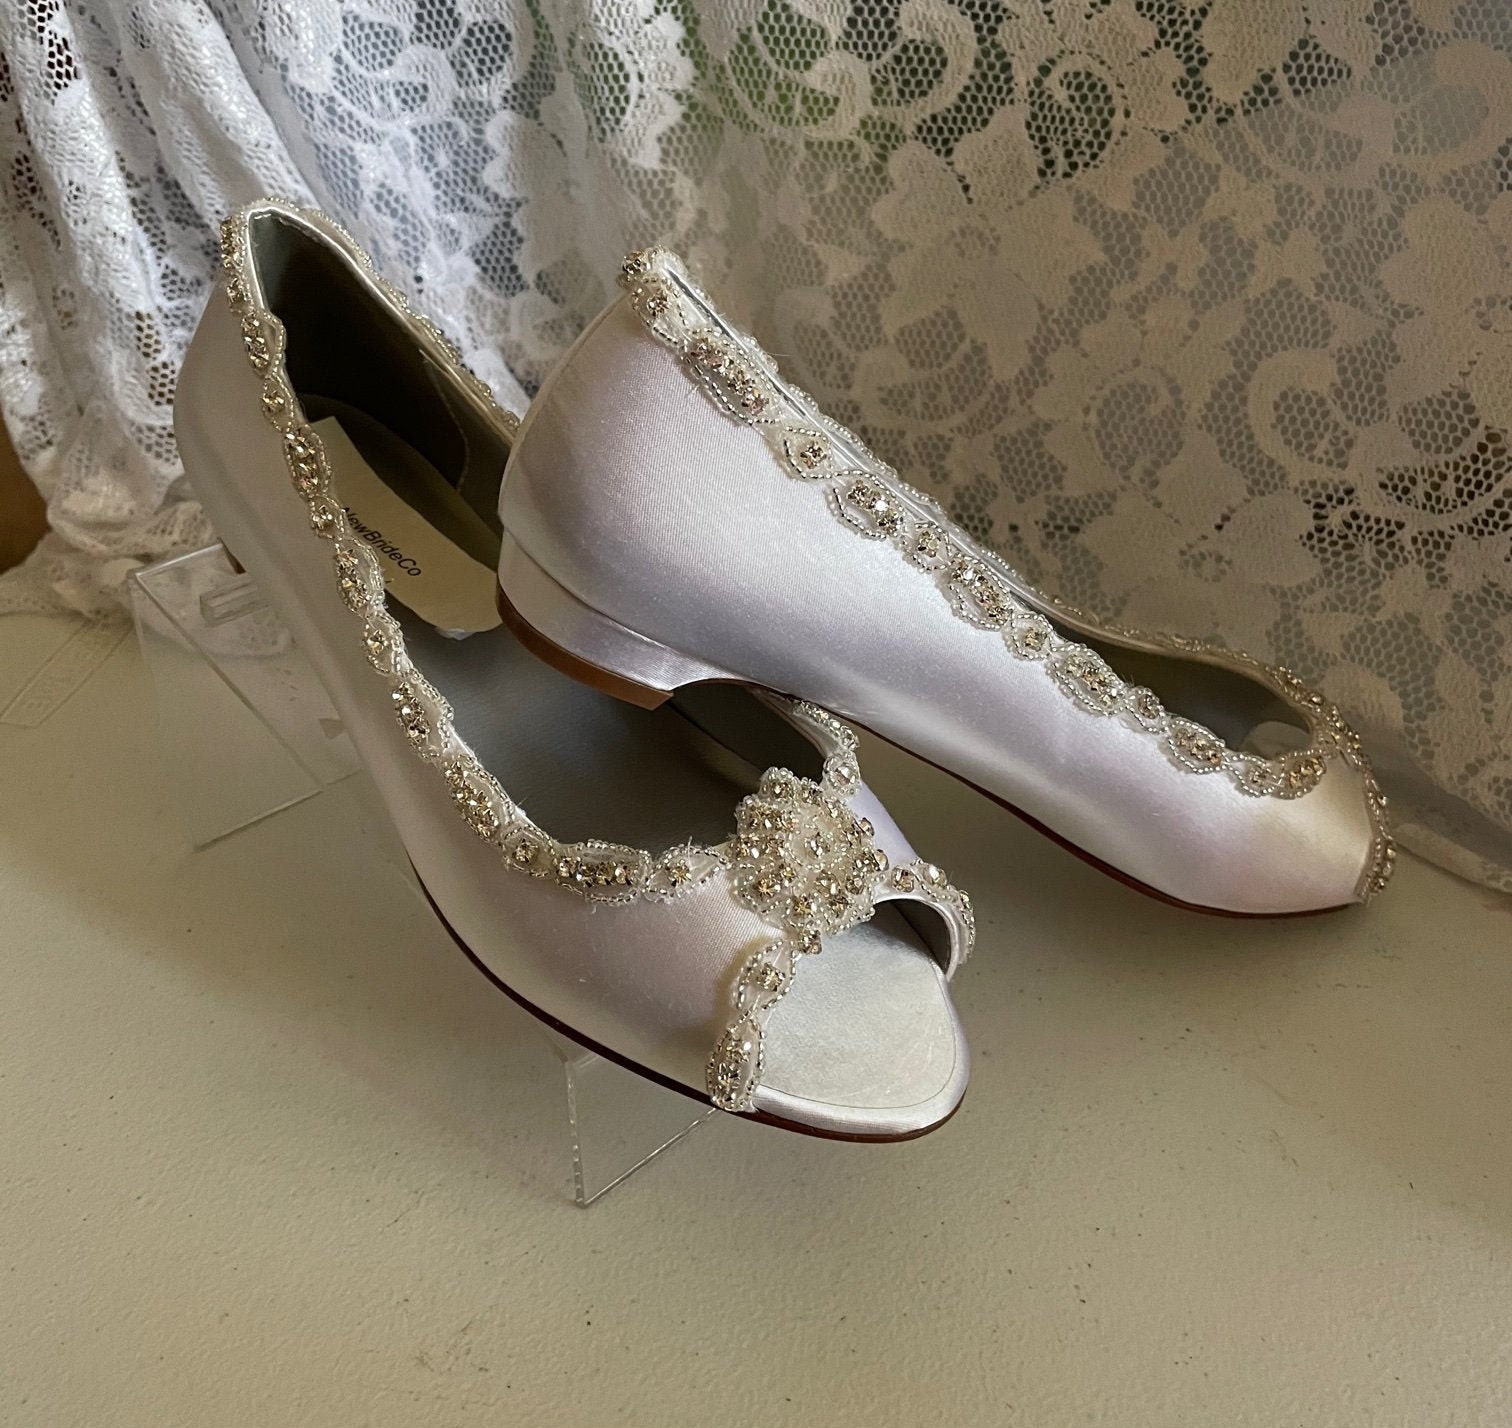 IVORY SATIN FLAT WEDDING SHOE WITH PEARL AND CRYSTAL TRIM